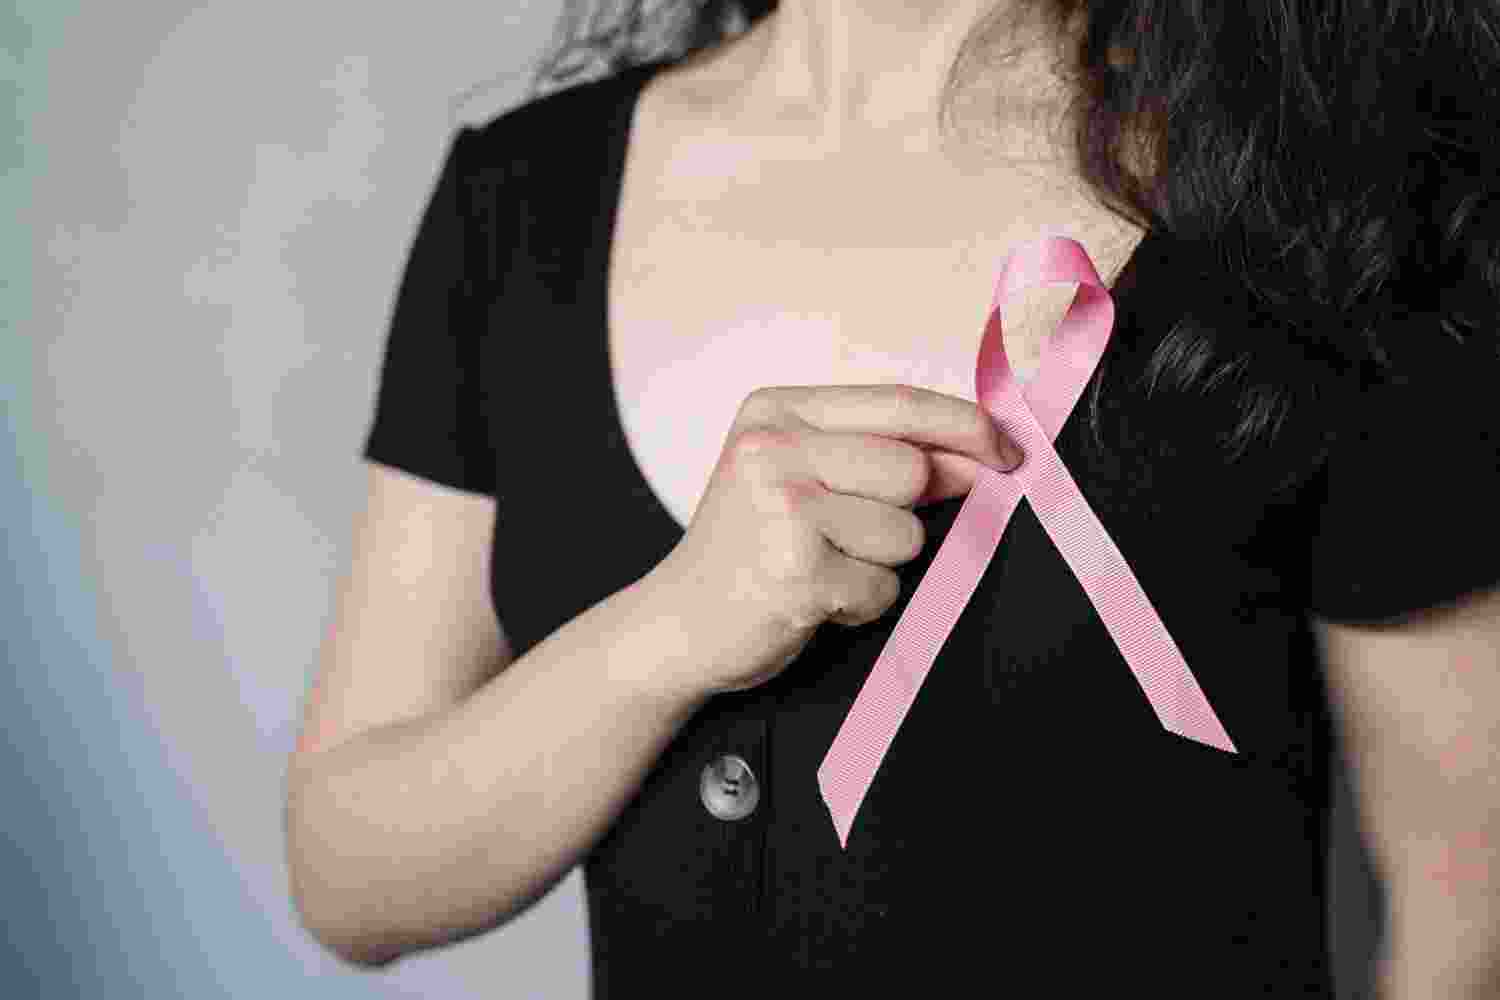 'Most common' breast cancer to cause a million annual deaths by 2040: Lancet